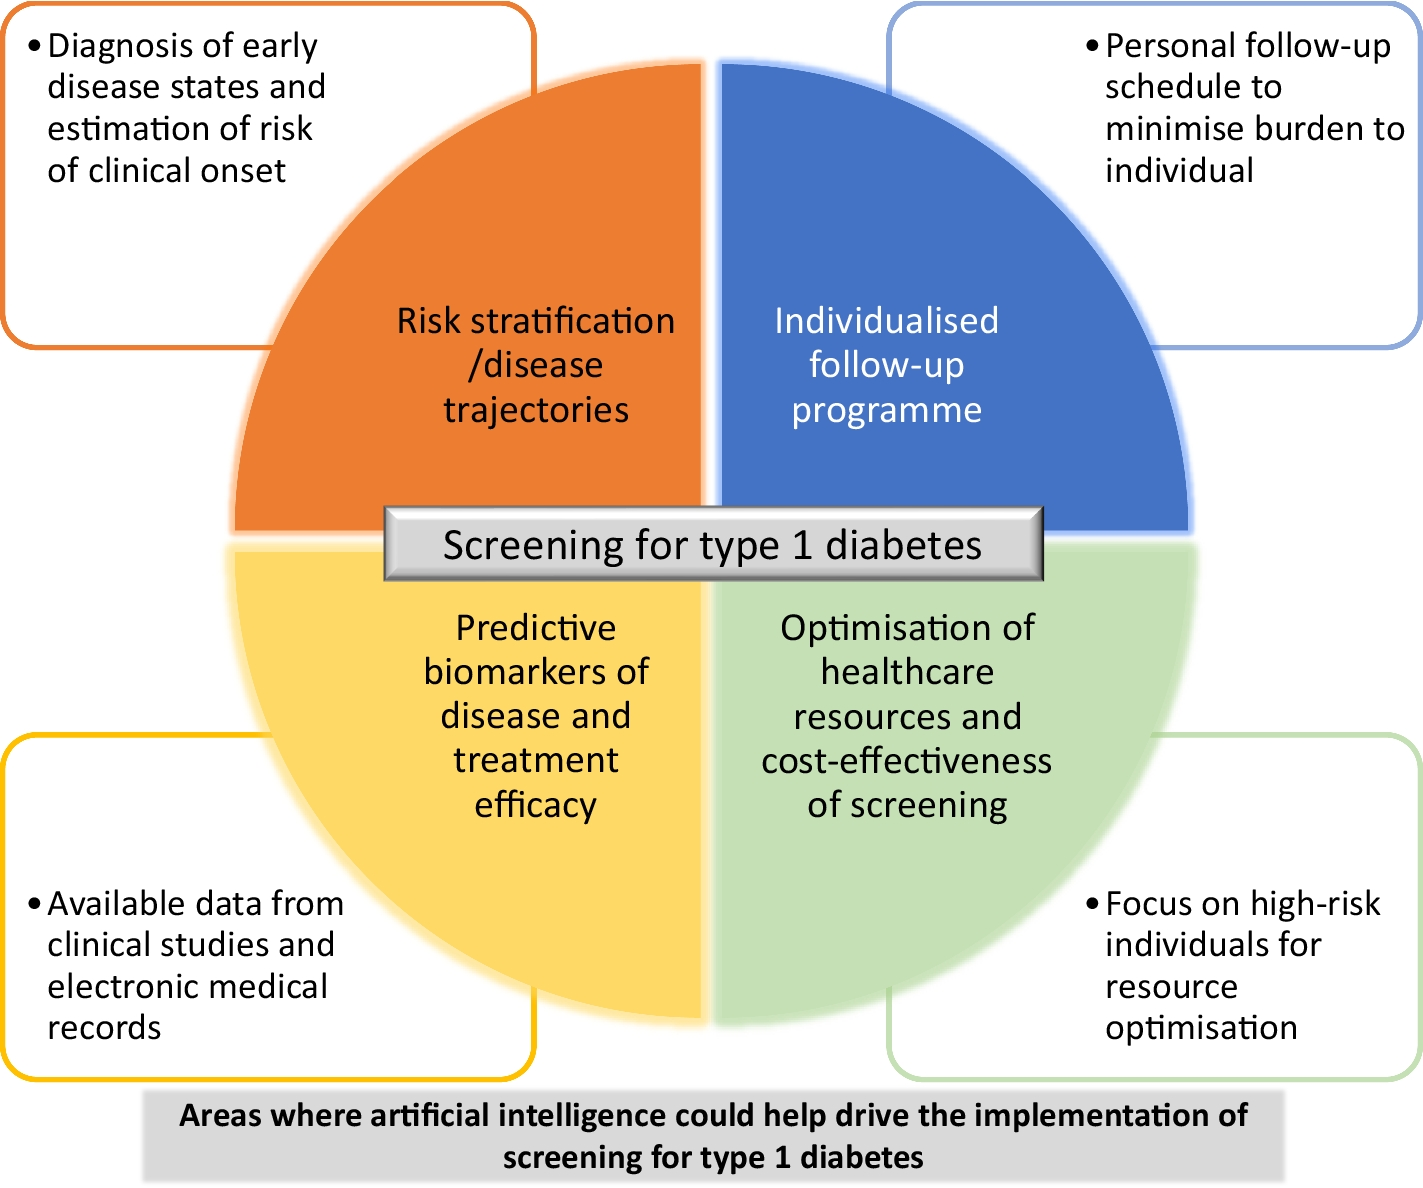 Assisting the implementation of screening for type 1 diabetes by using artificial intelligence on publicly available data